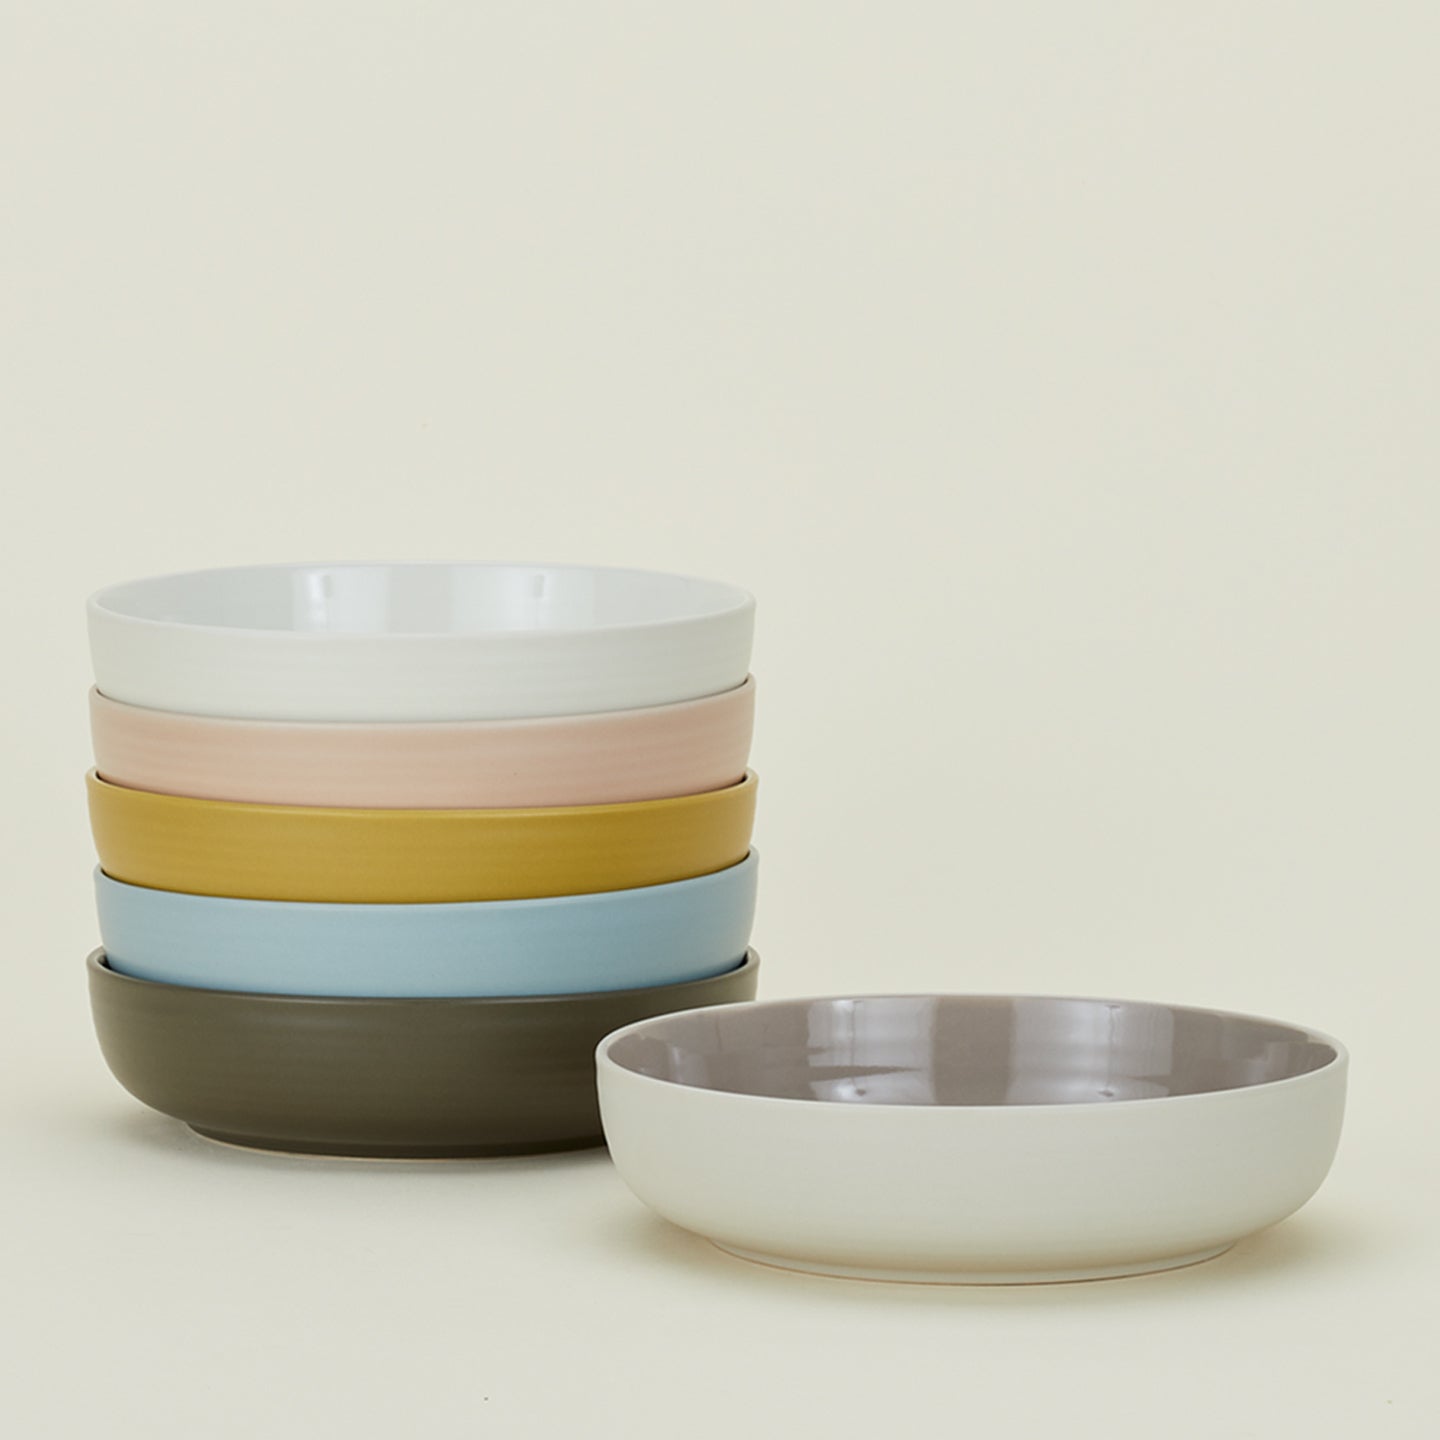 Stack of Essential Low Bowls in various colors.